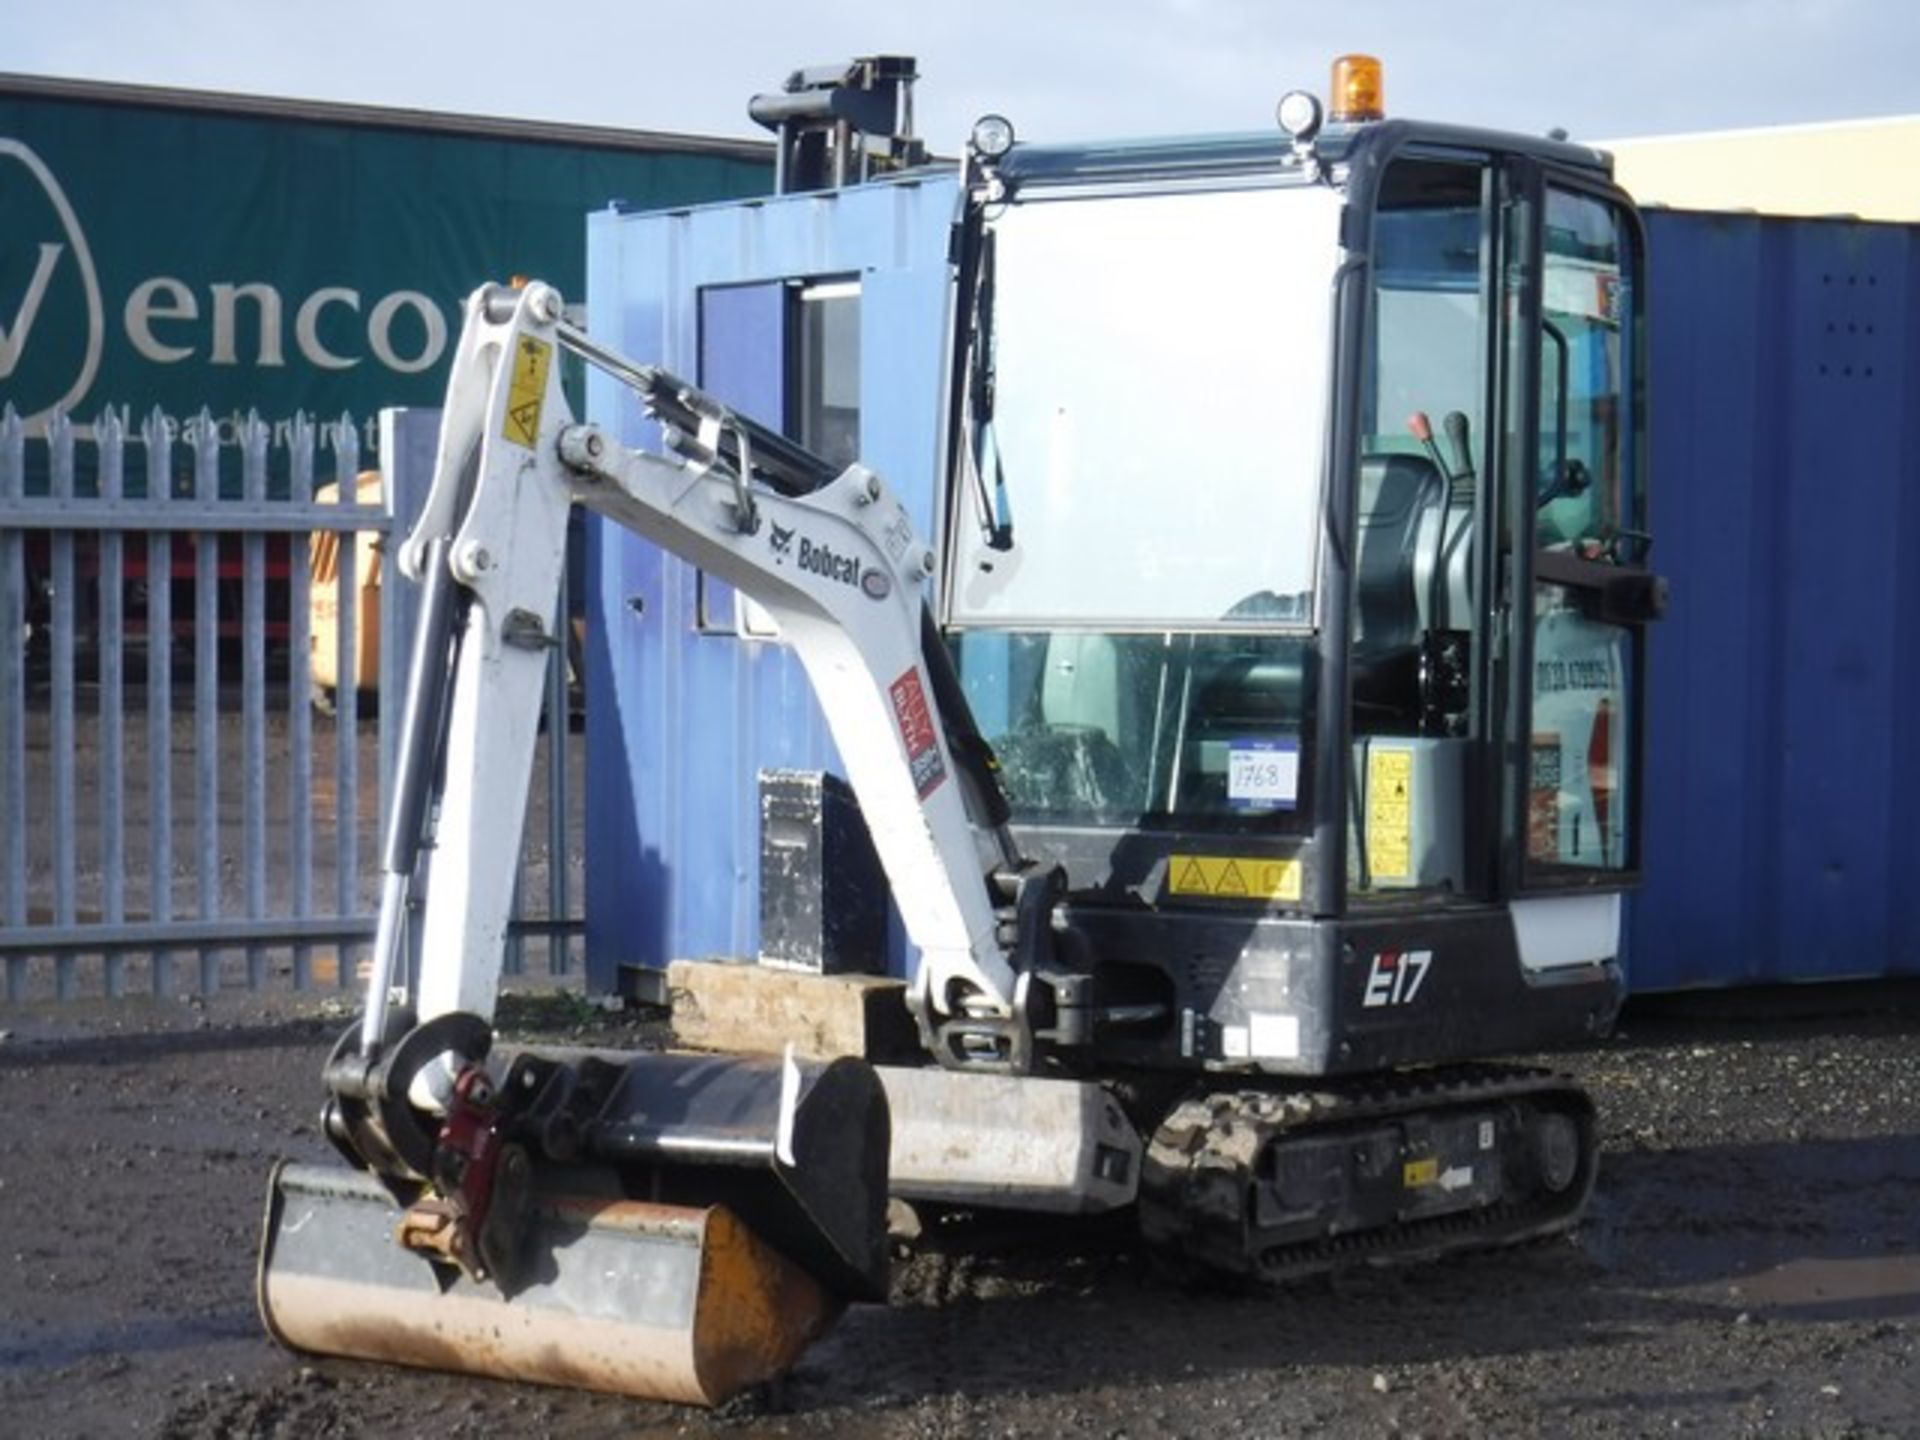 BOB CAT E17 - 2018 COMPACT EXCAVATOR WITH CAB AND BUCKET 166 HRS (NOT VERIFIED) SN - B27H12779